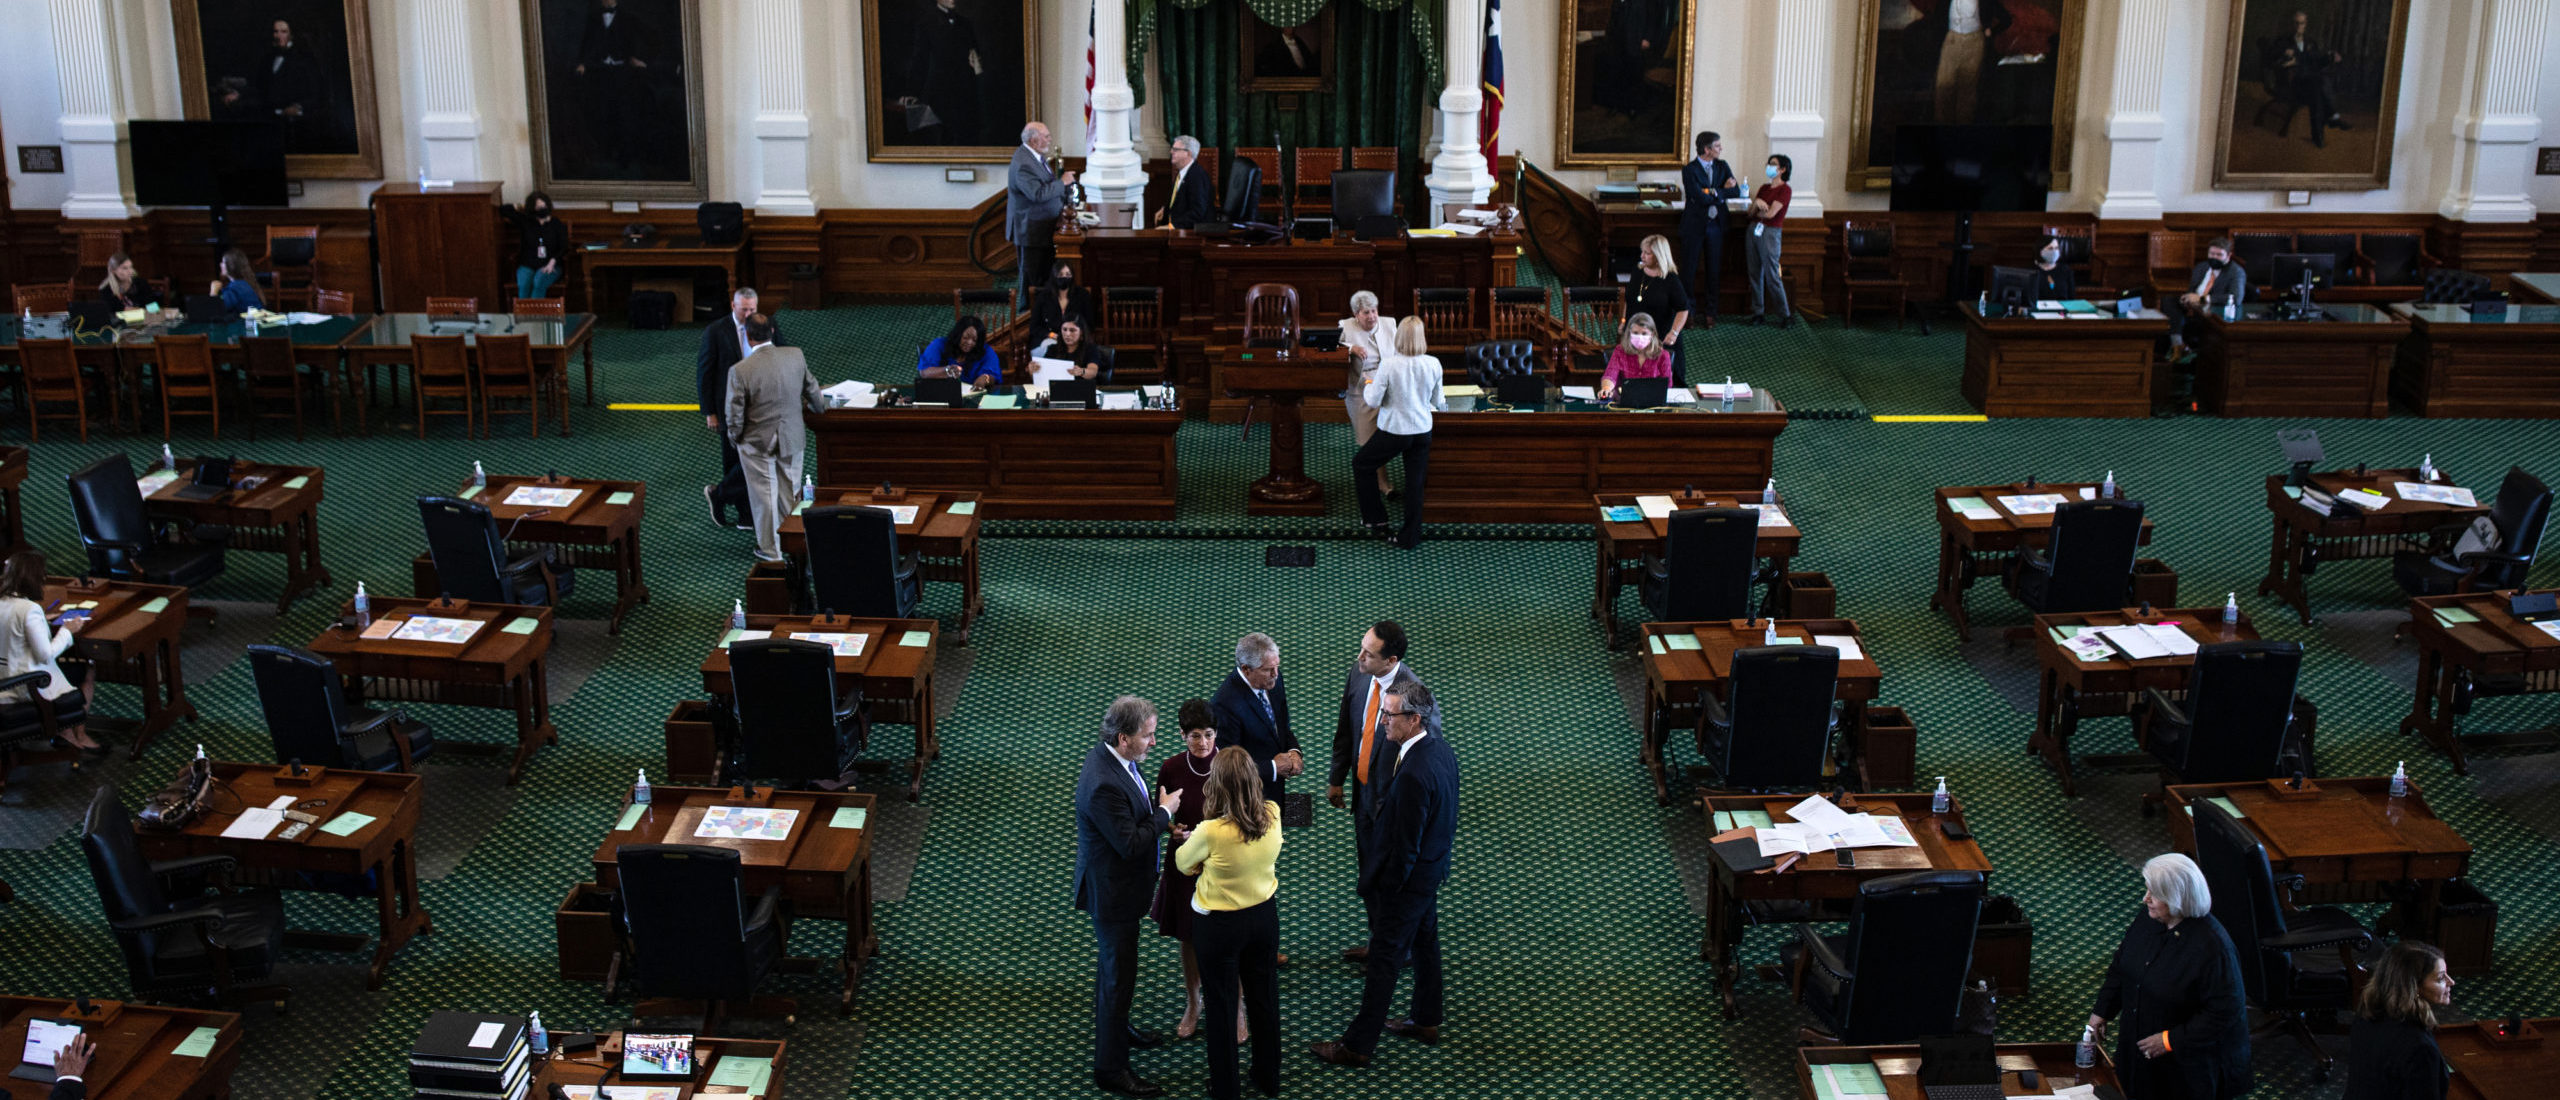 Texas state senators are gathered in the Senate chamber on the first day of the 87th Legislature's third special session at the State Capitol on September 20, 2021 in Austin, Texas.